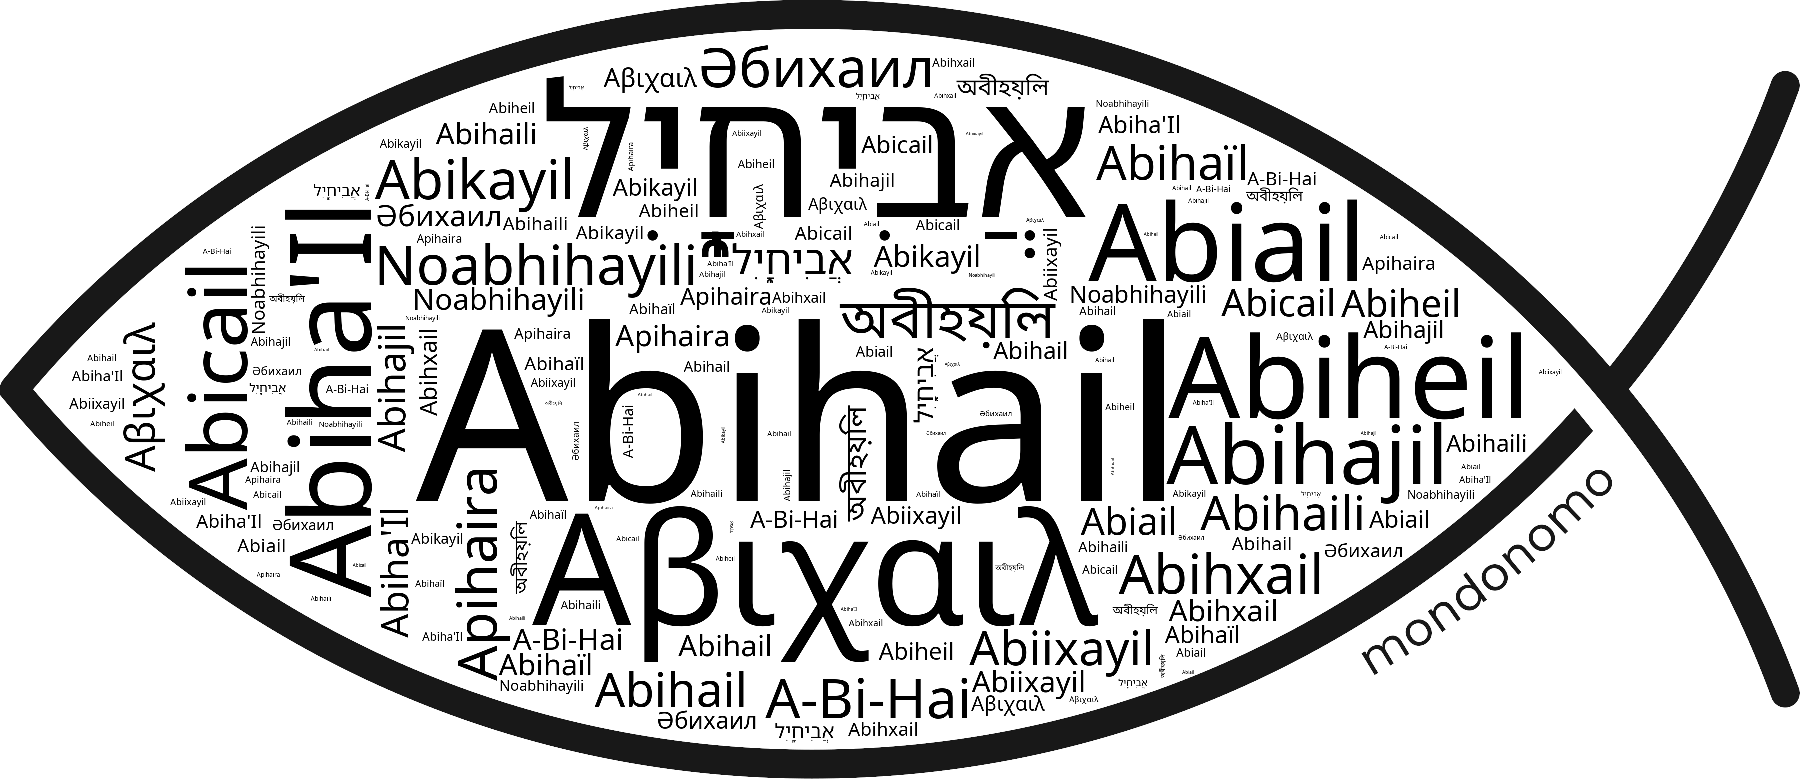 Name Abihail in the world's Bibles